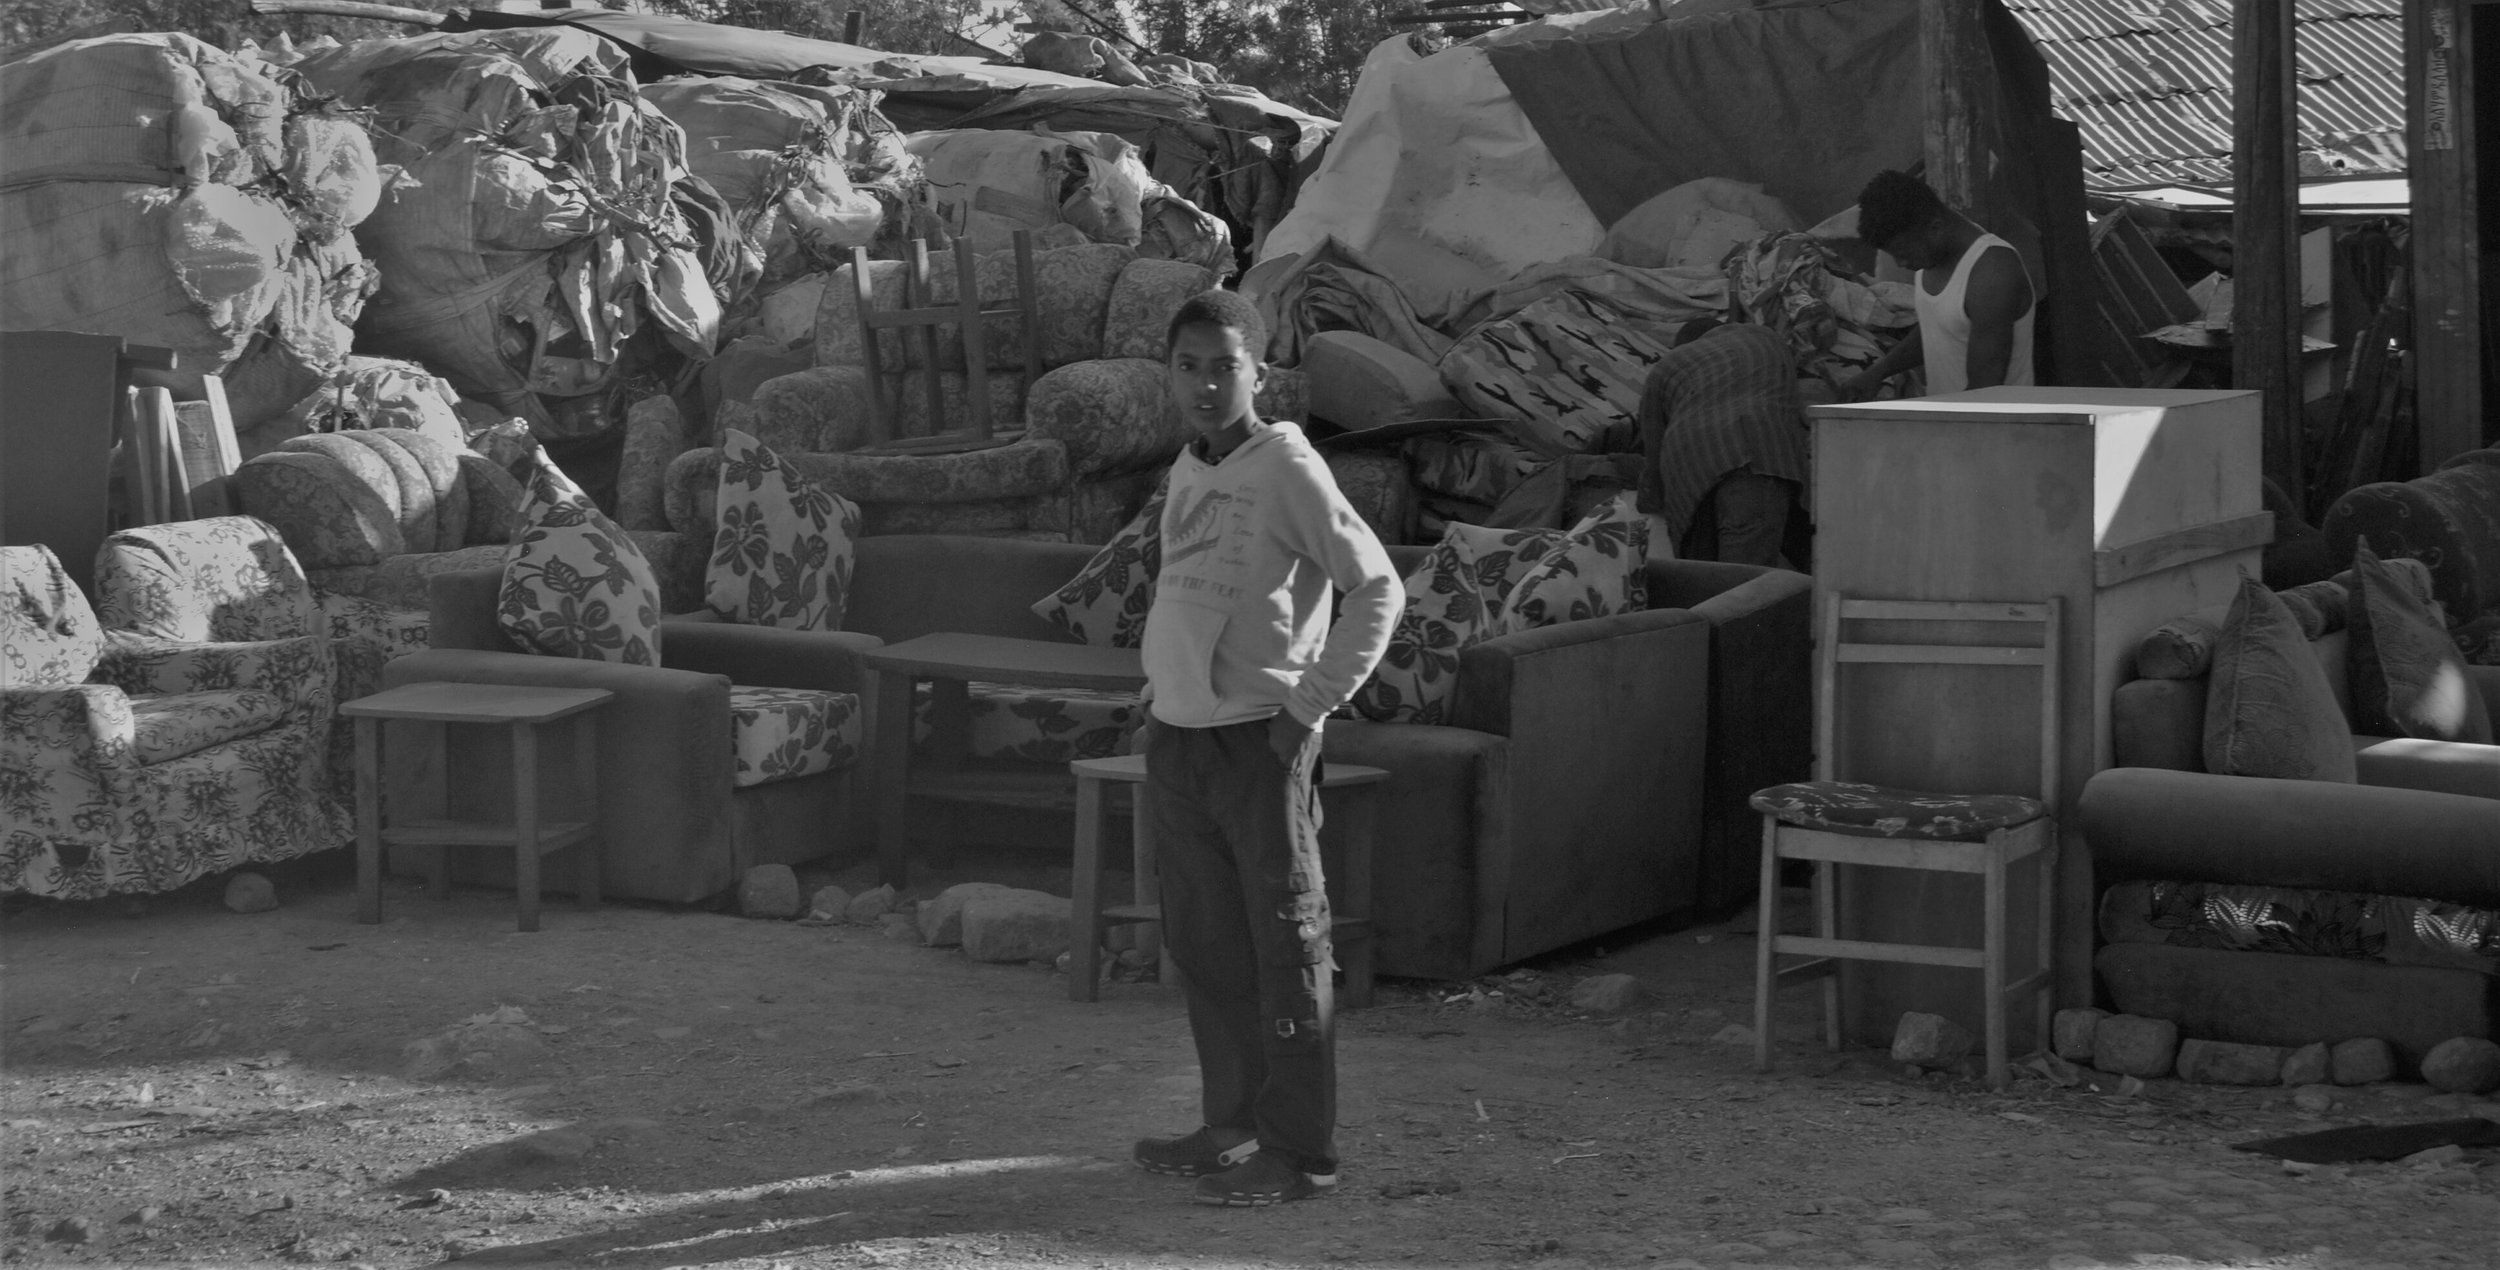  11. In this photo, a young boy stands proud in front of his family's used furniture shop. He stares into the camera with a smile, proud of the hard work he has put in to ensure his family's business is successful. The store has several pieces of fur